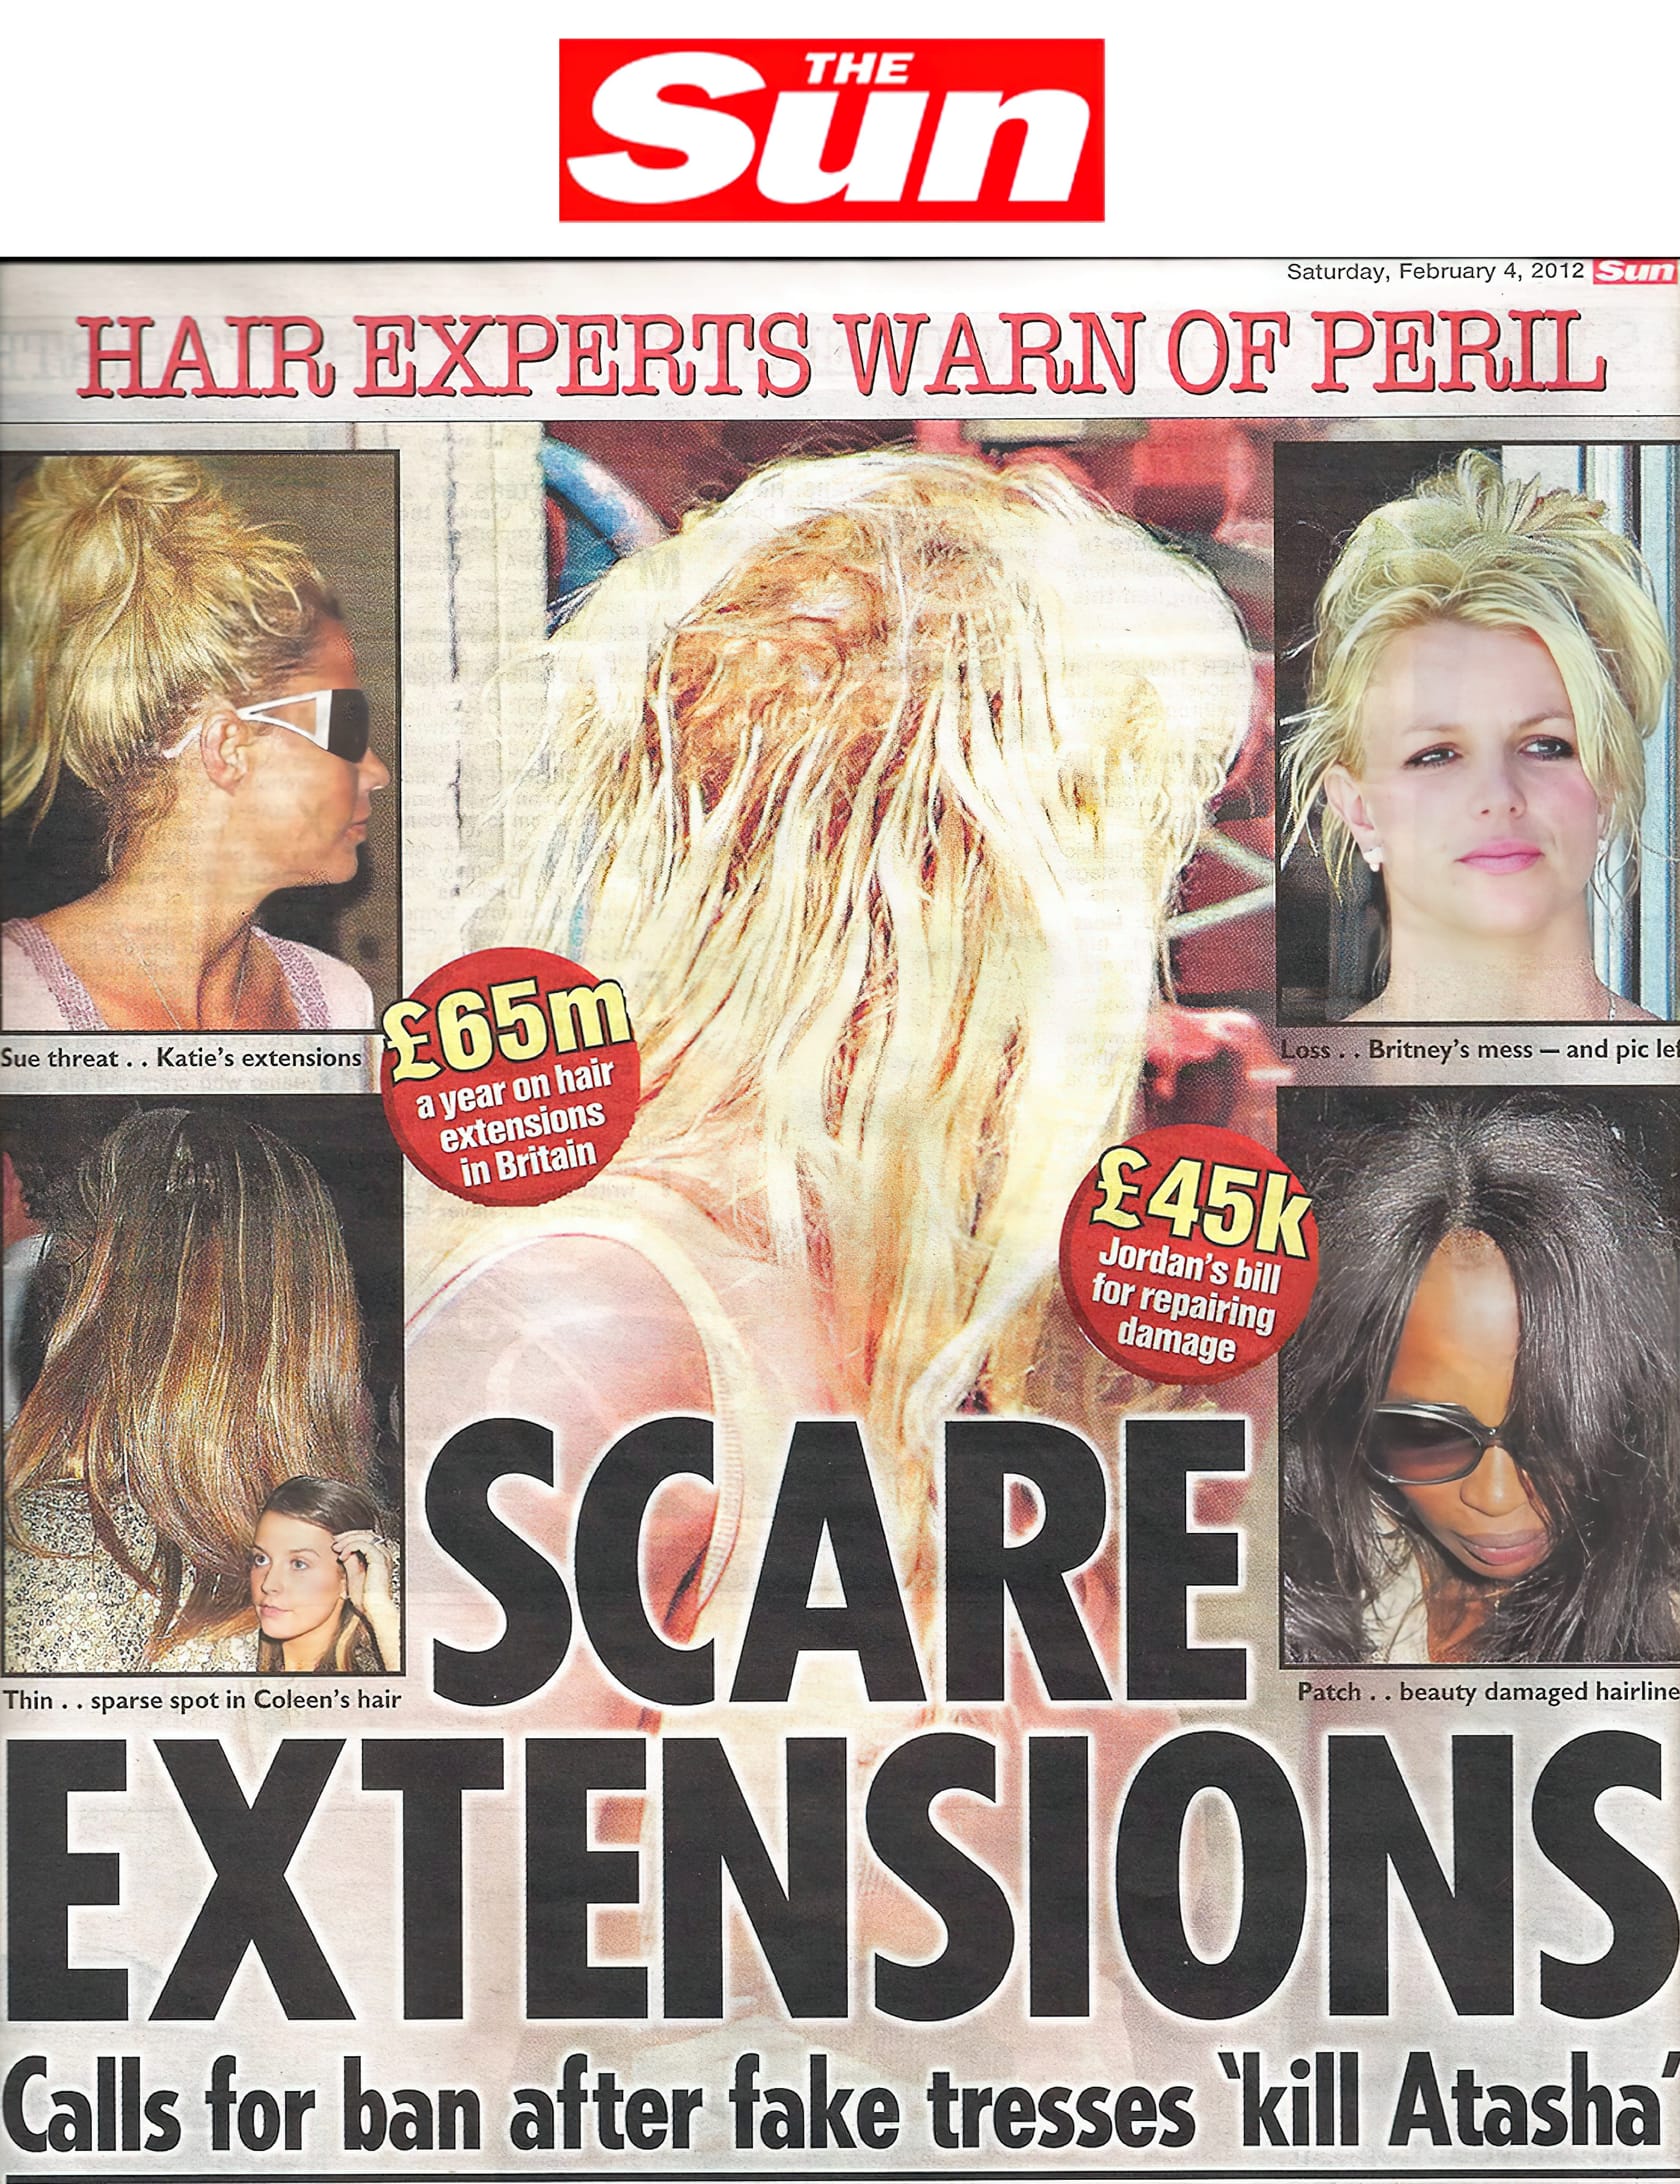 'Scare Extensions - calls for ban after glue 'kills' girl' - The Sun & others